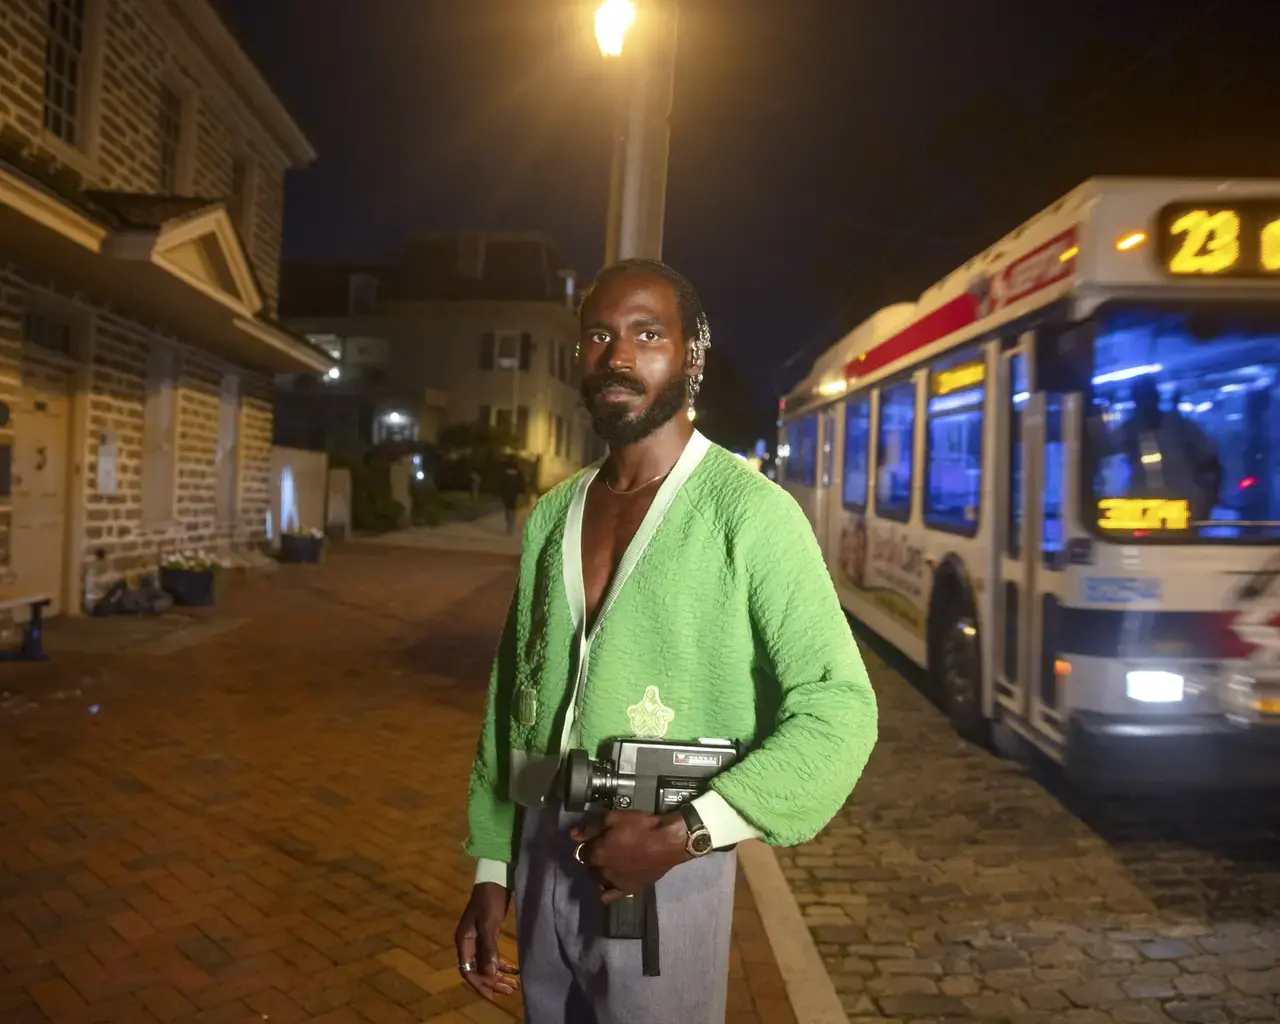 A portrait of filmmaker Vernon Jordan. He stands outside at night holding his video camera. He is a Black man with facial hair wearing a green v-neck cardigan. A SEPTA bus is visible come down the street behind him.